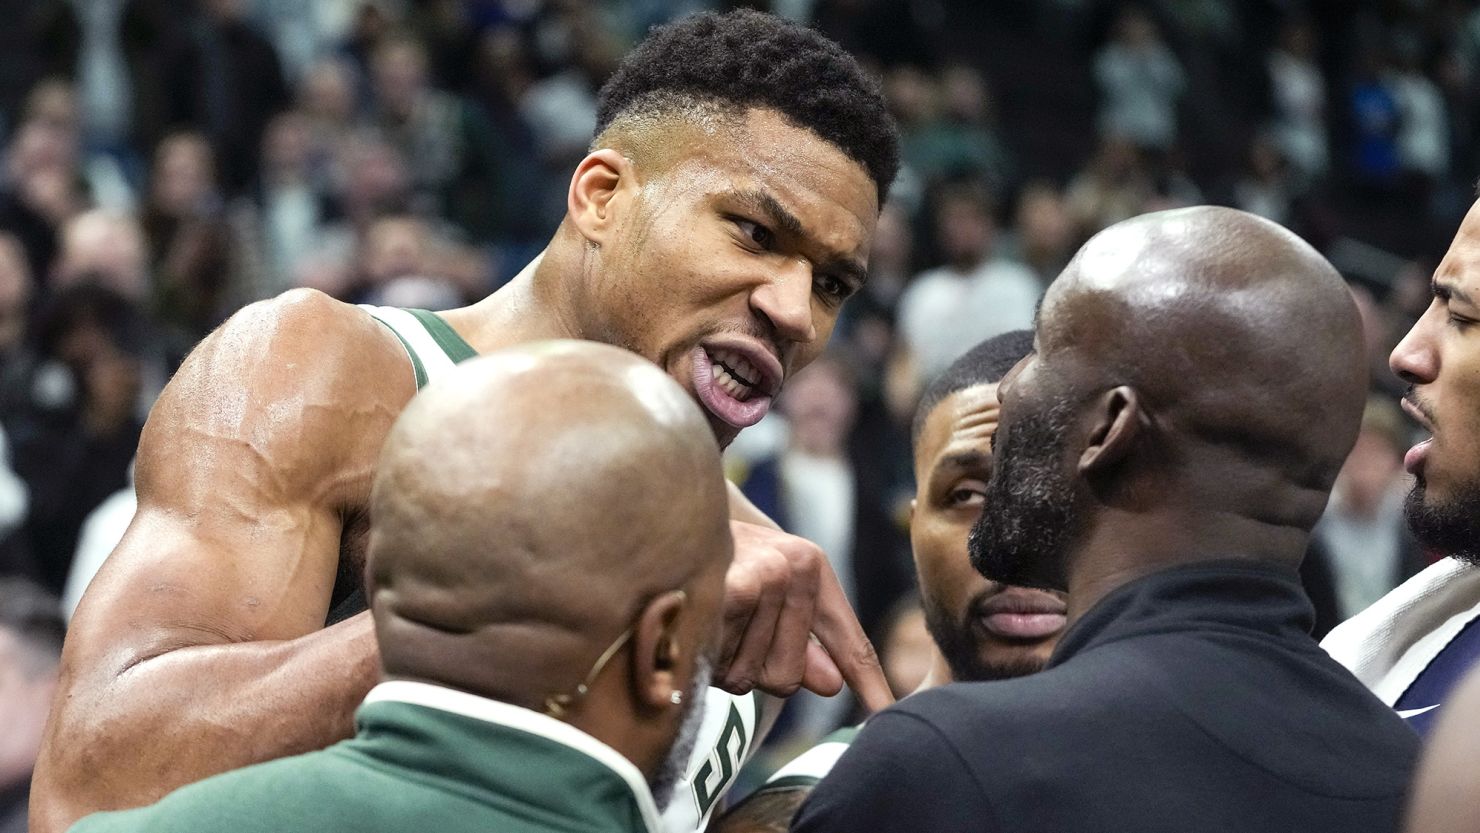 Giannis Antetokounmpo drops career-high 64 points as post-game